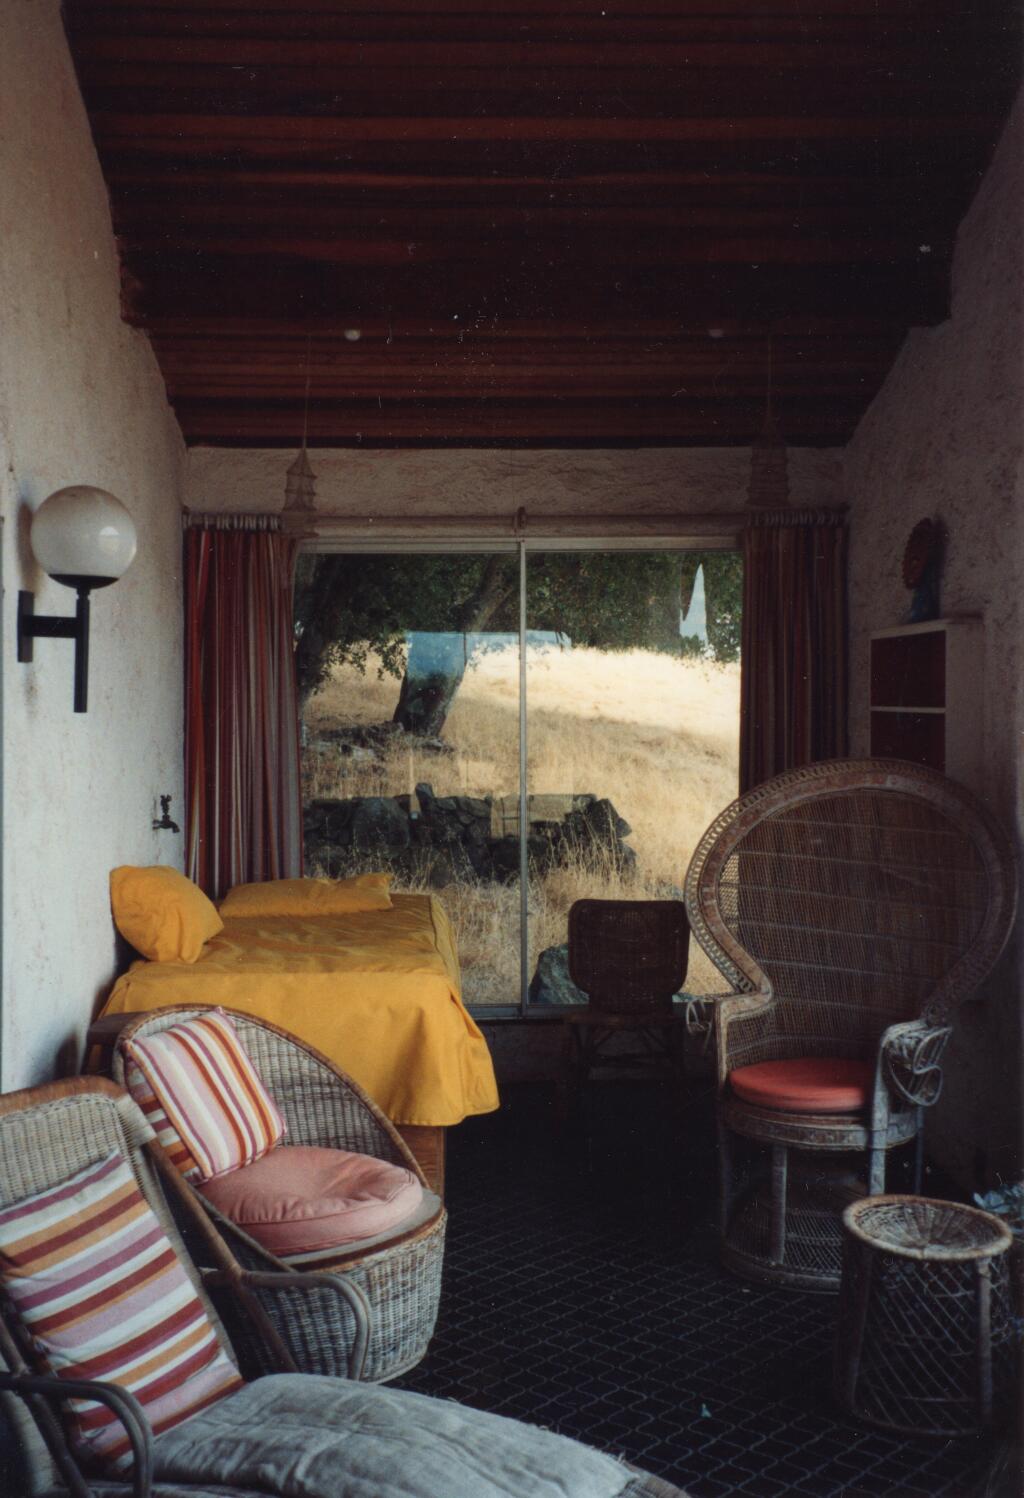 M.F.K. Fisher often sat on this porch while taking in nature’s wonders in The Valley of the Moon. (M.F.K. Fisher Literary Trust and Family)